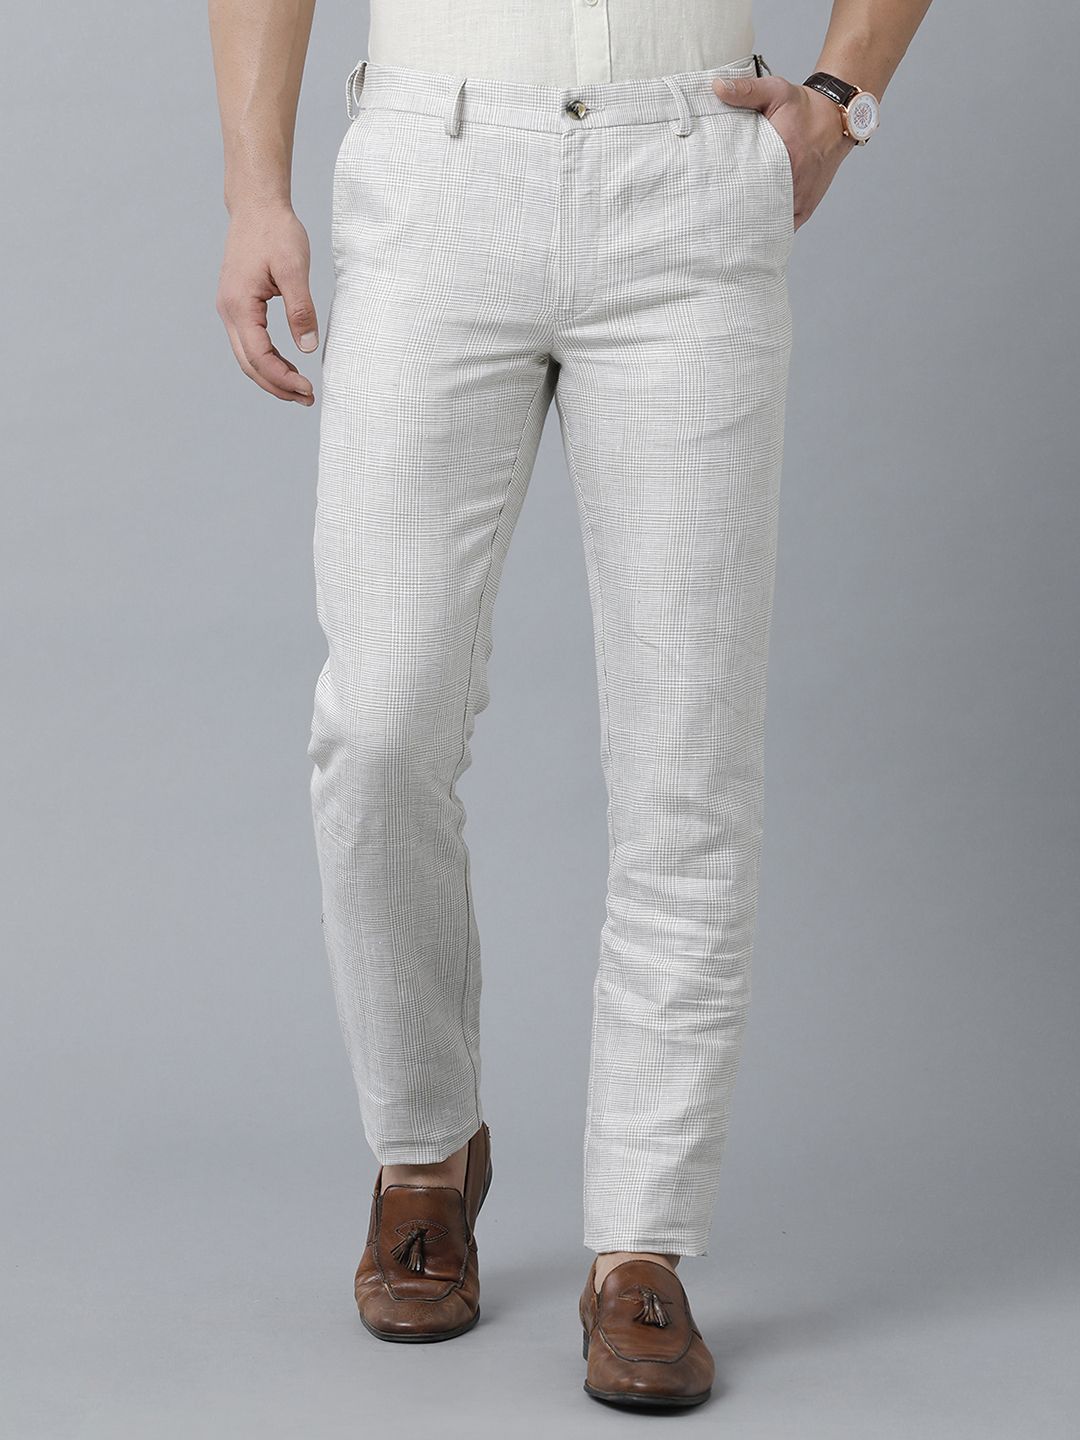 Buy White Trousers  Pants for Women by PIROH Online  Ajiocom